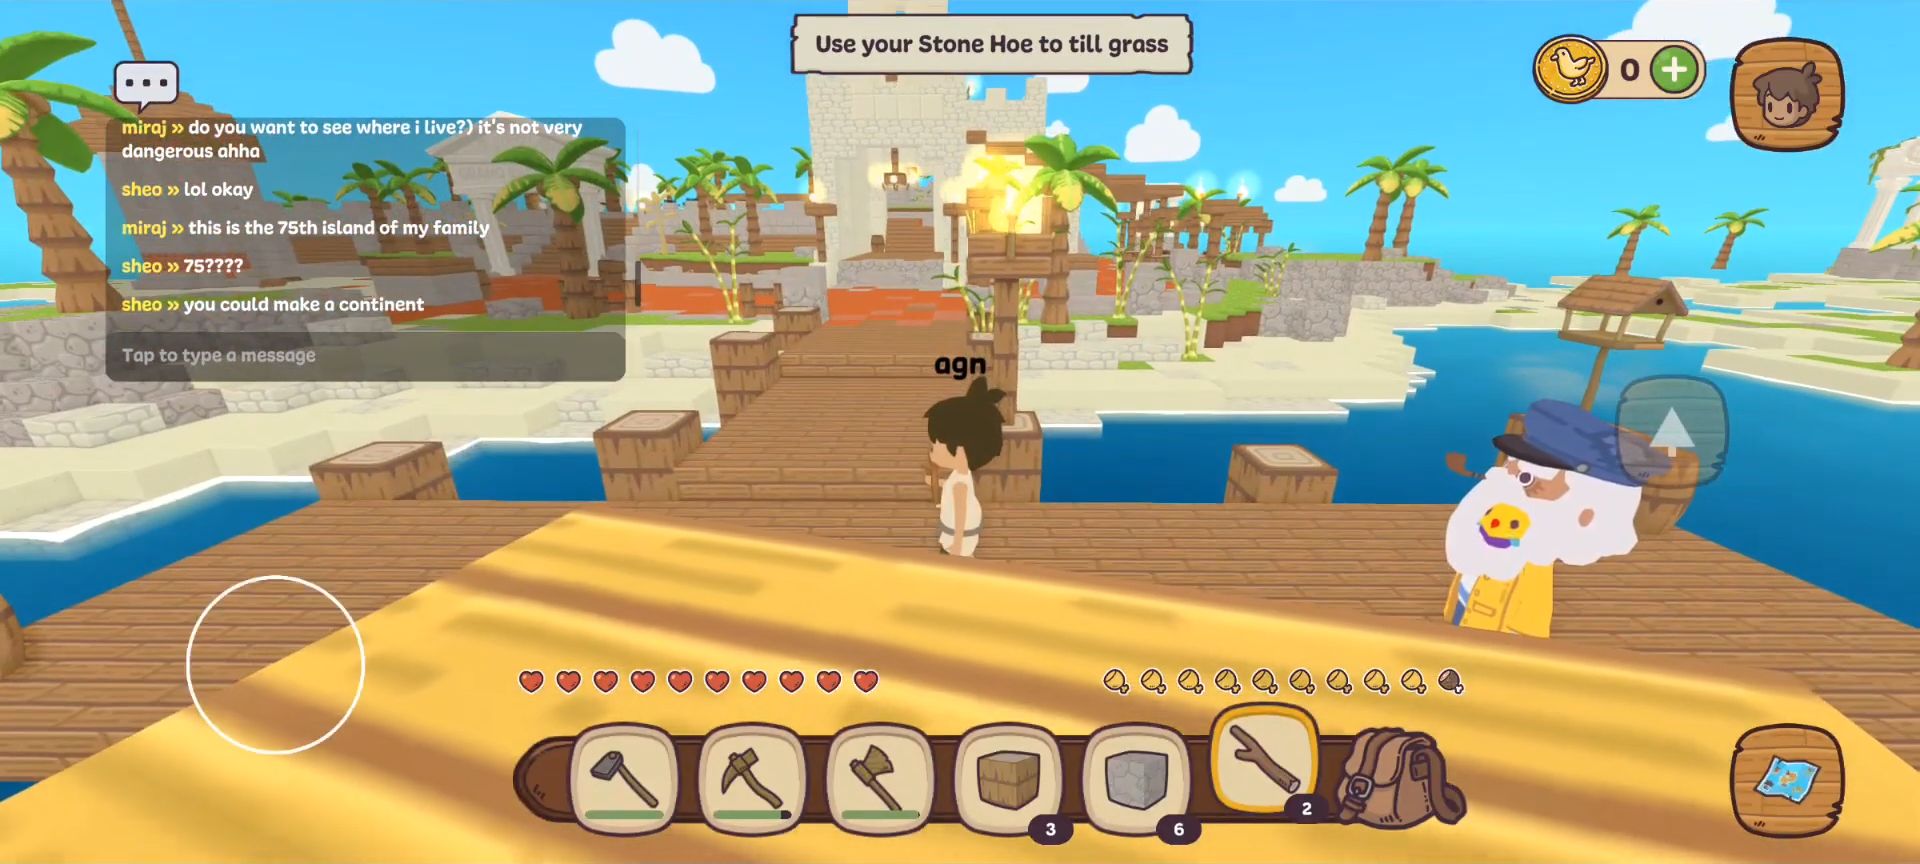 Castaways - Android game screenshots.